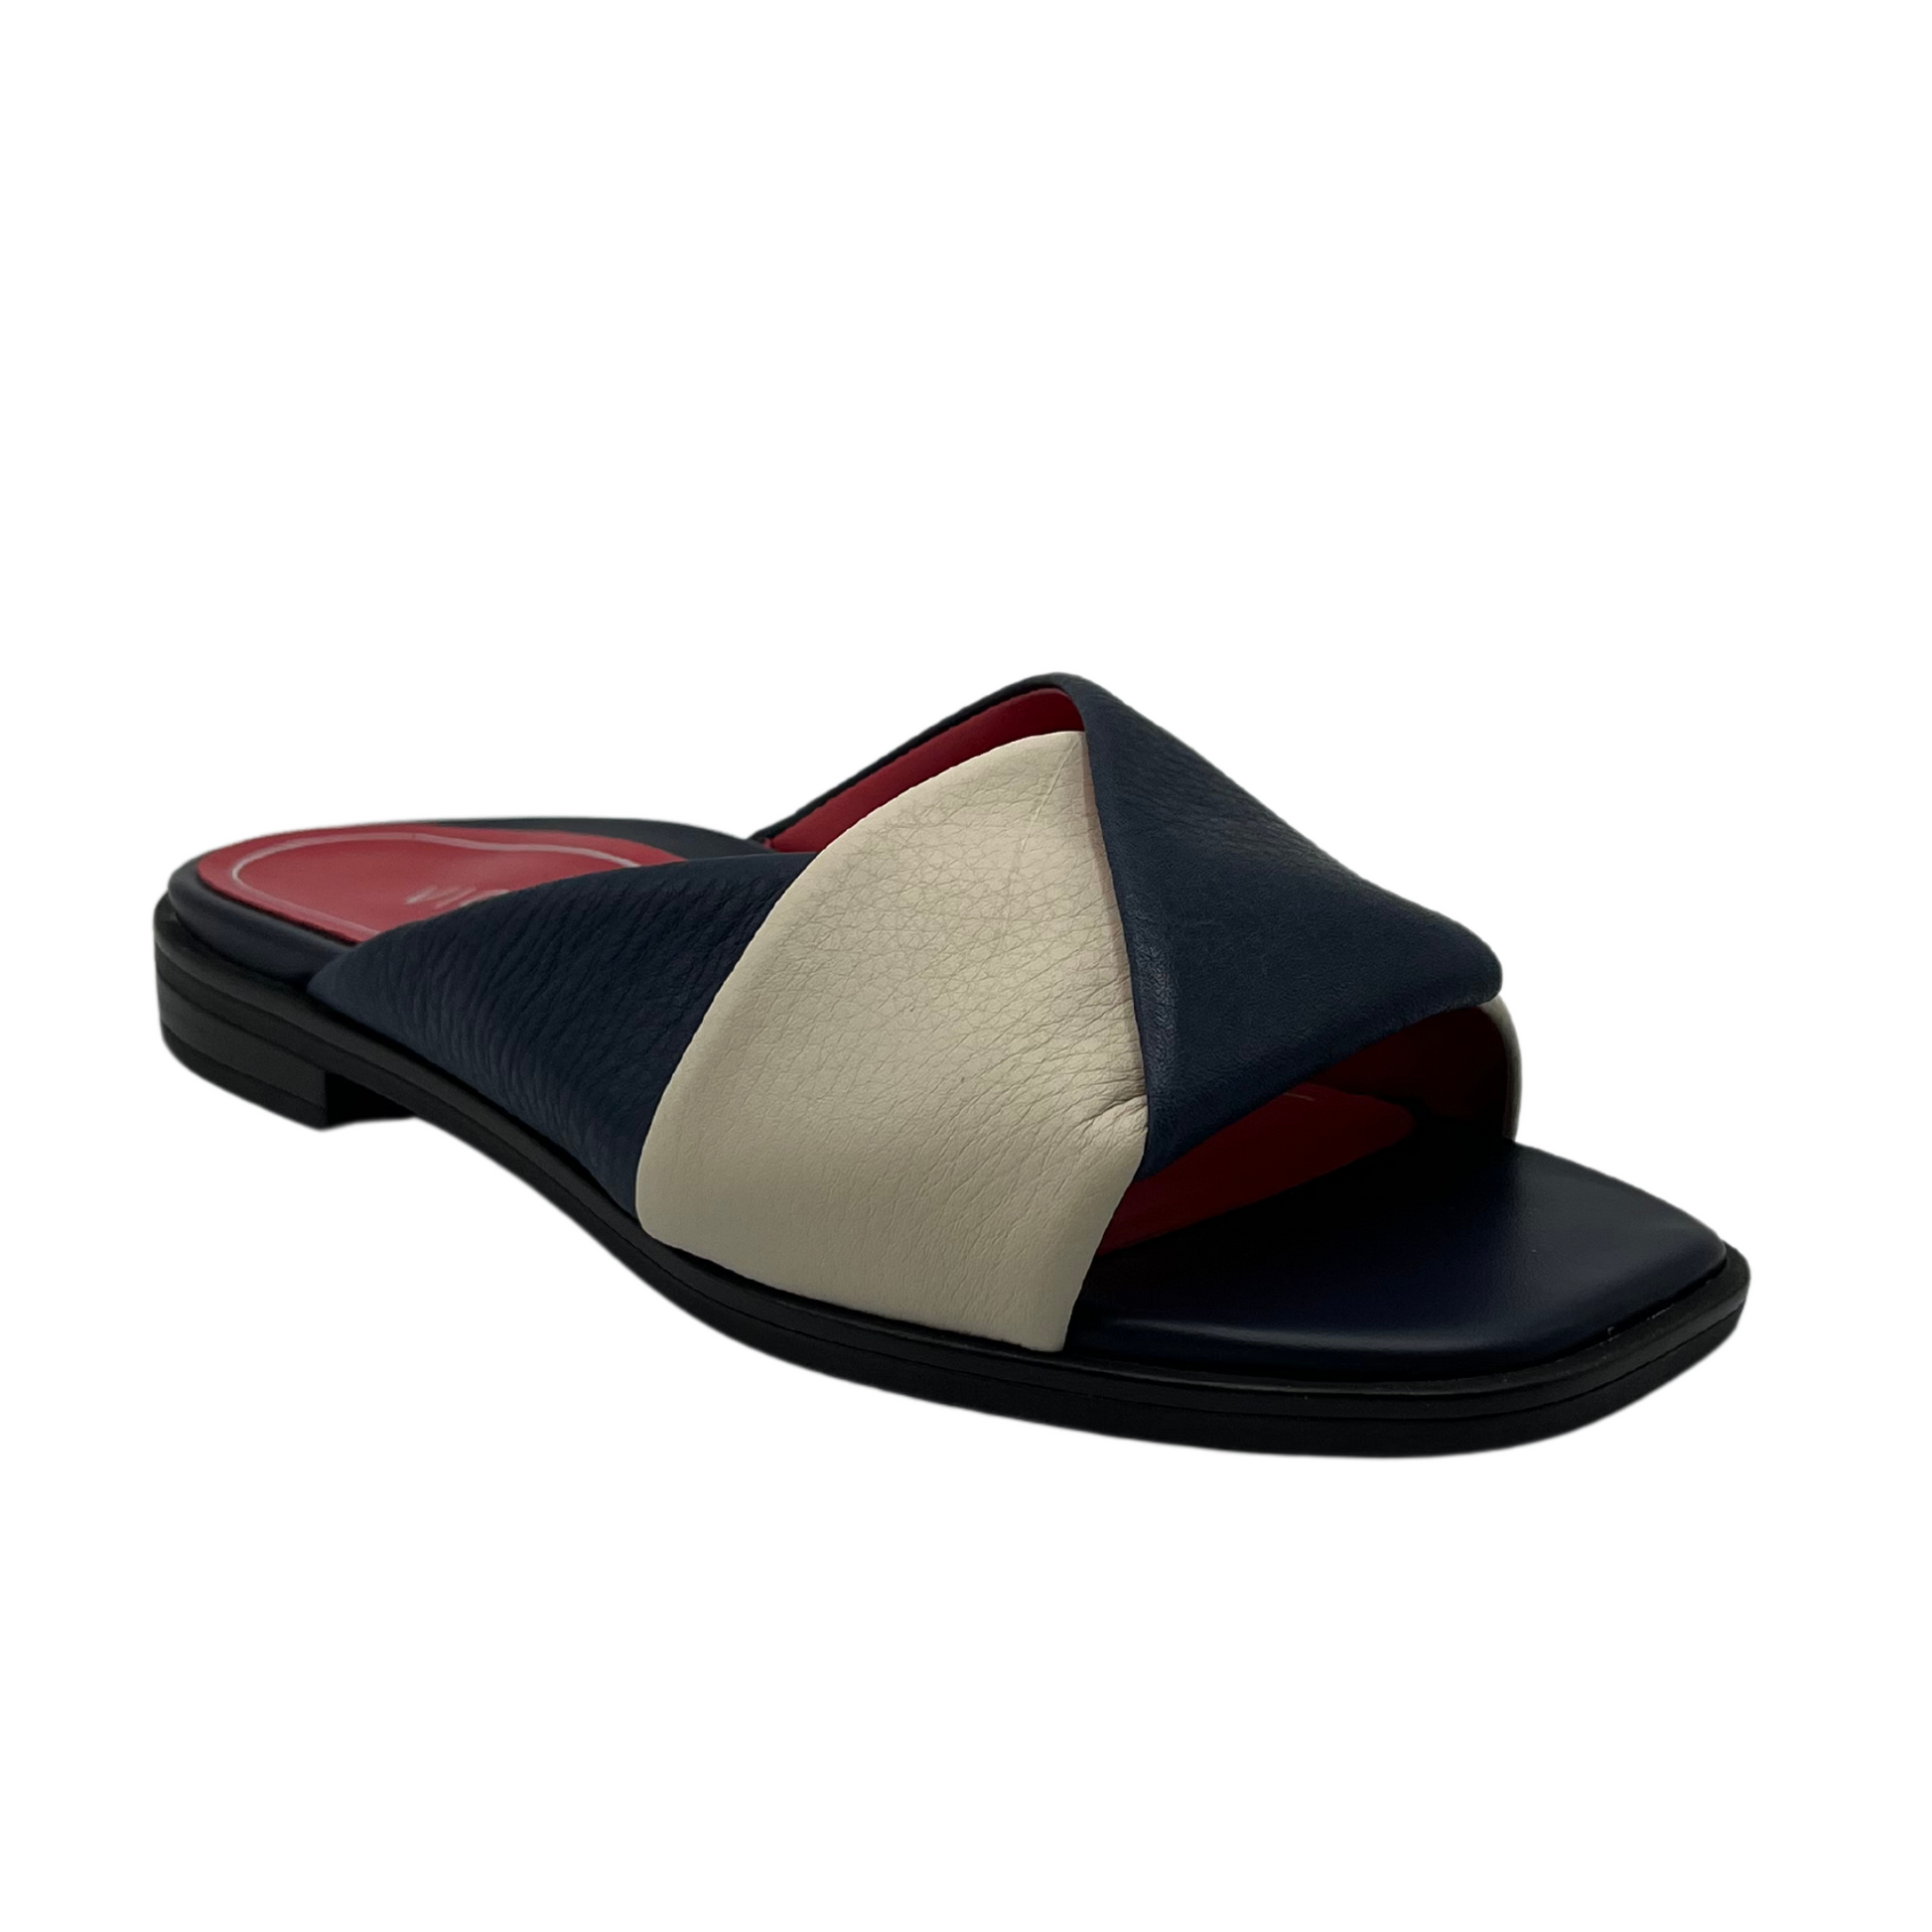 45 degree angled view of navy and cream leather slip on with red inner lining and square toe